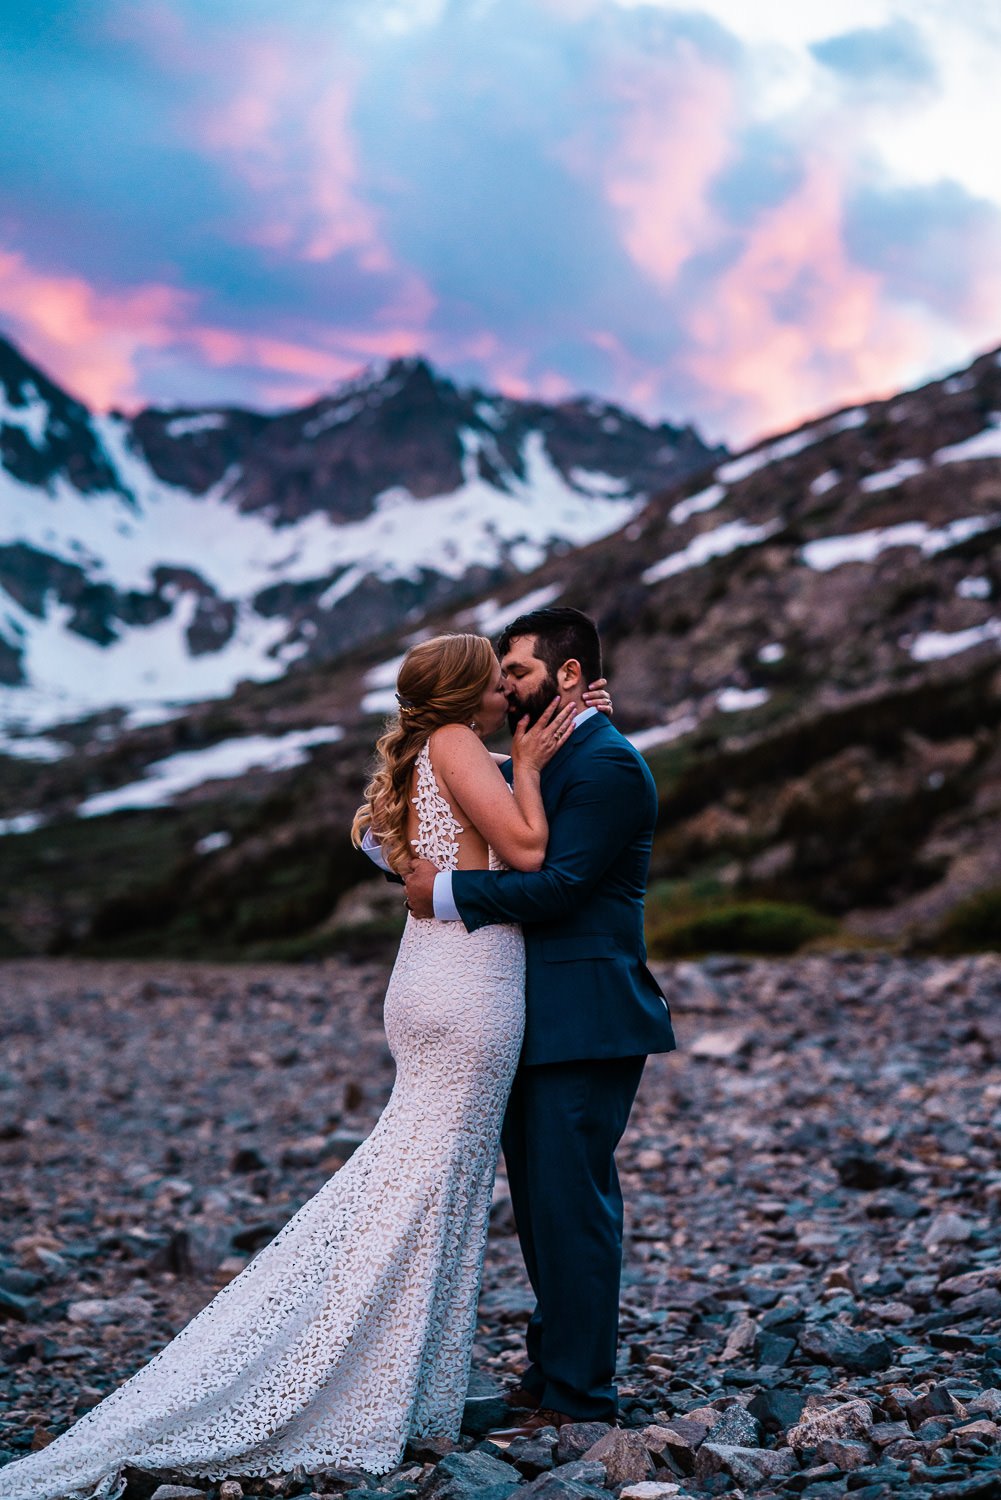 An enchanting elopement photo capturing a passionate kiss between a man and woman with majestic mountains as their backdrop.